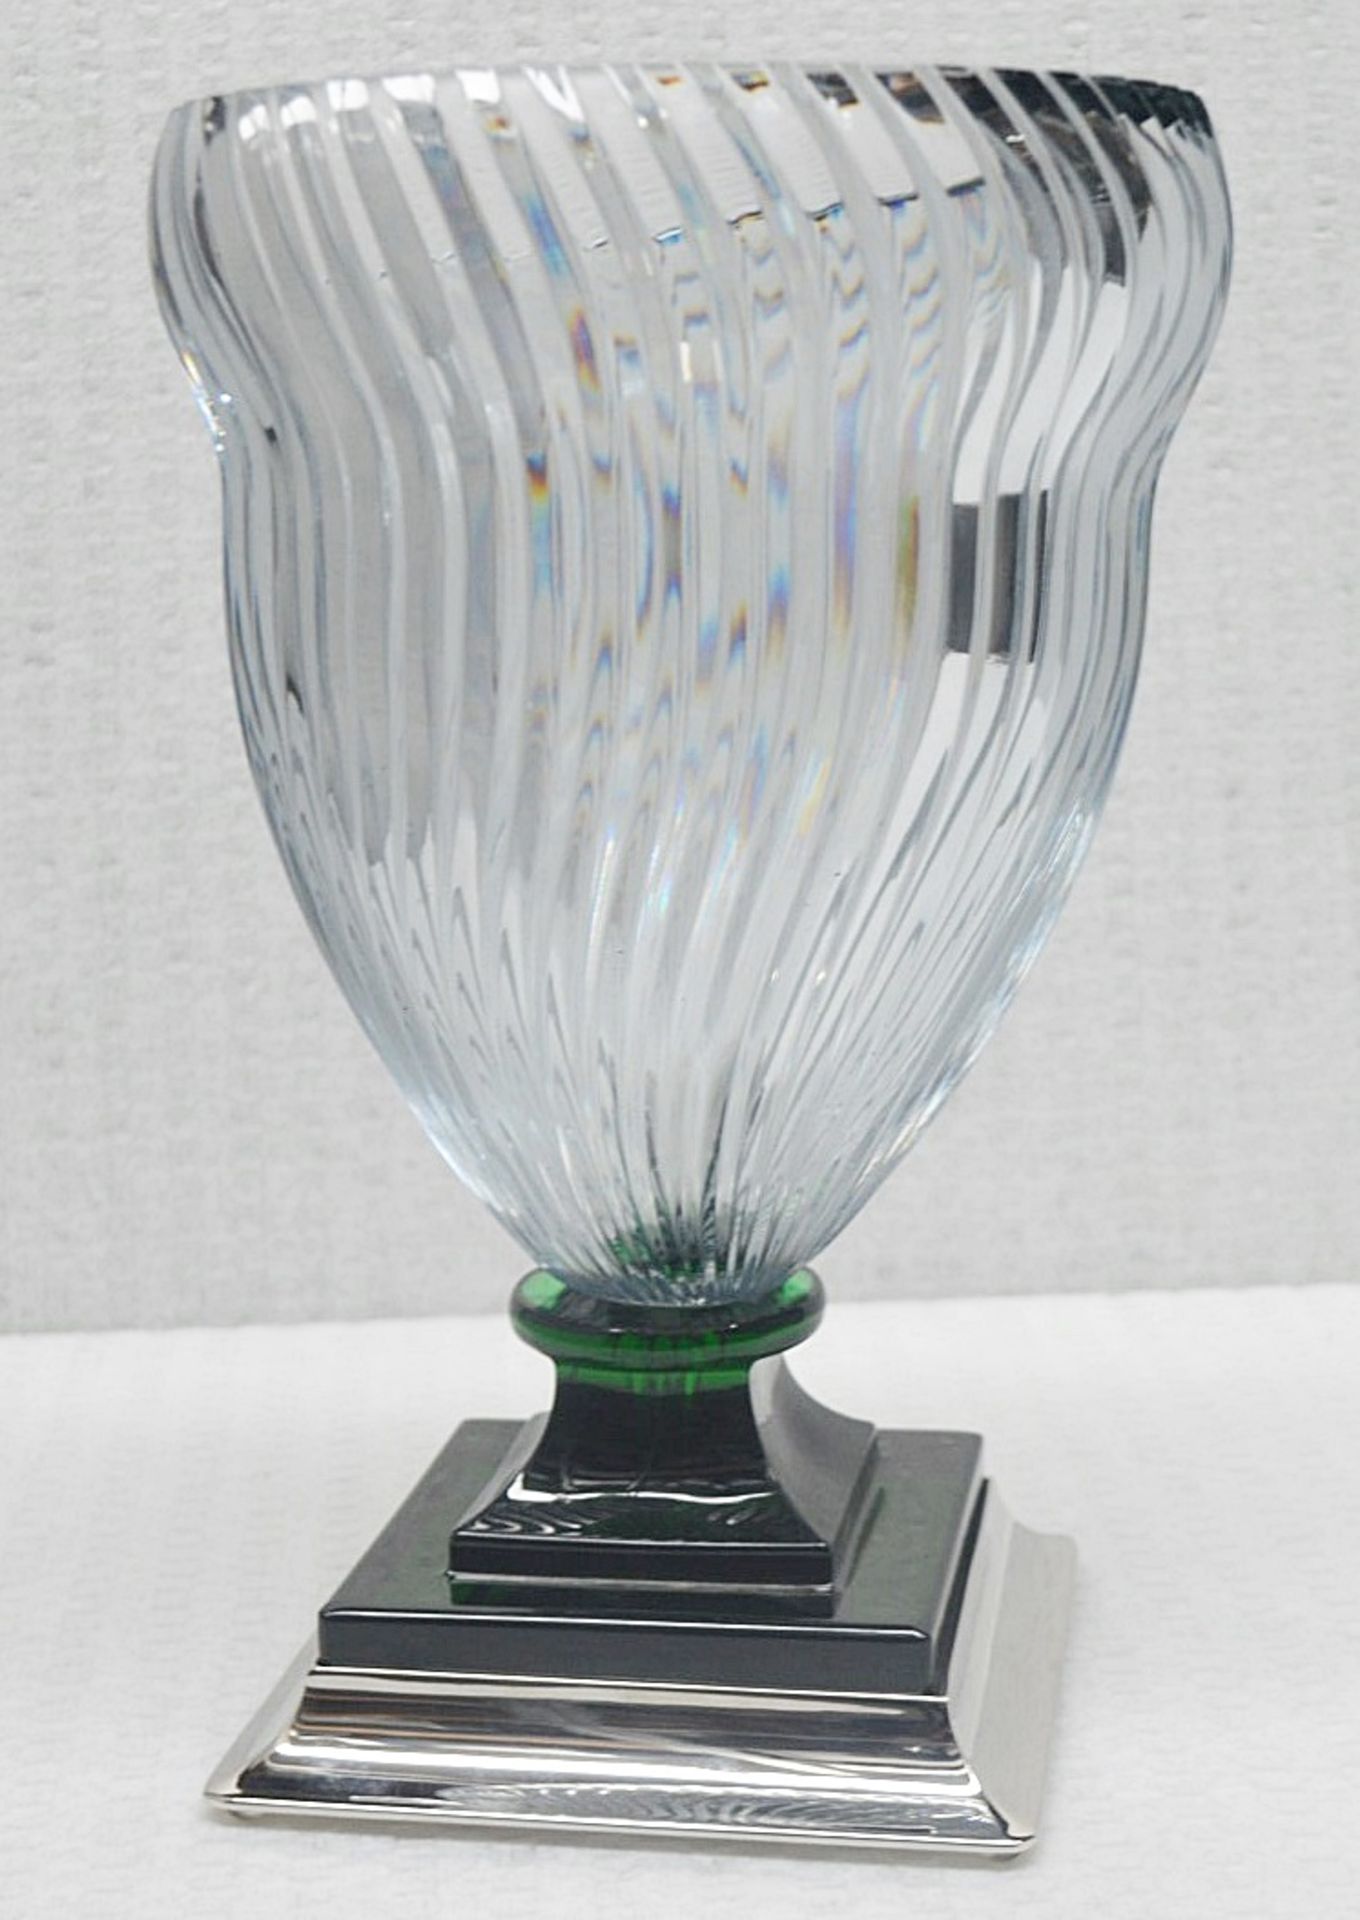 1 x BALDI 'Home Jewels' Italian Hand-crafted Artisan GHIAHDA VASE In A Green & Clear Crystal With